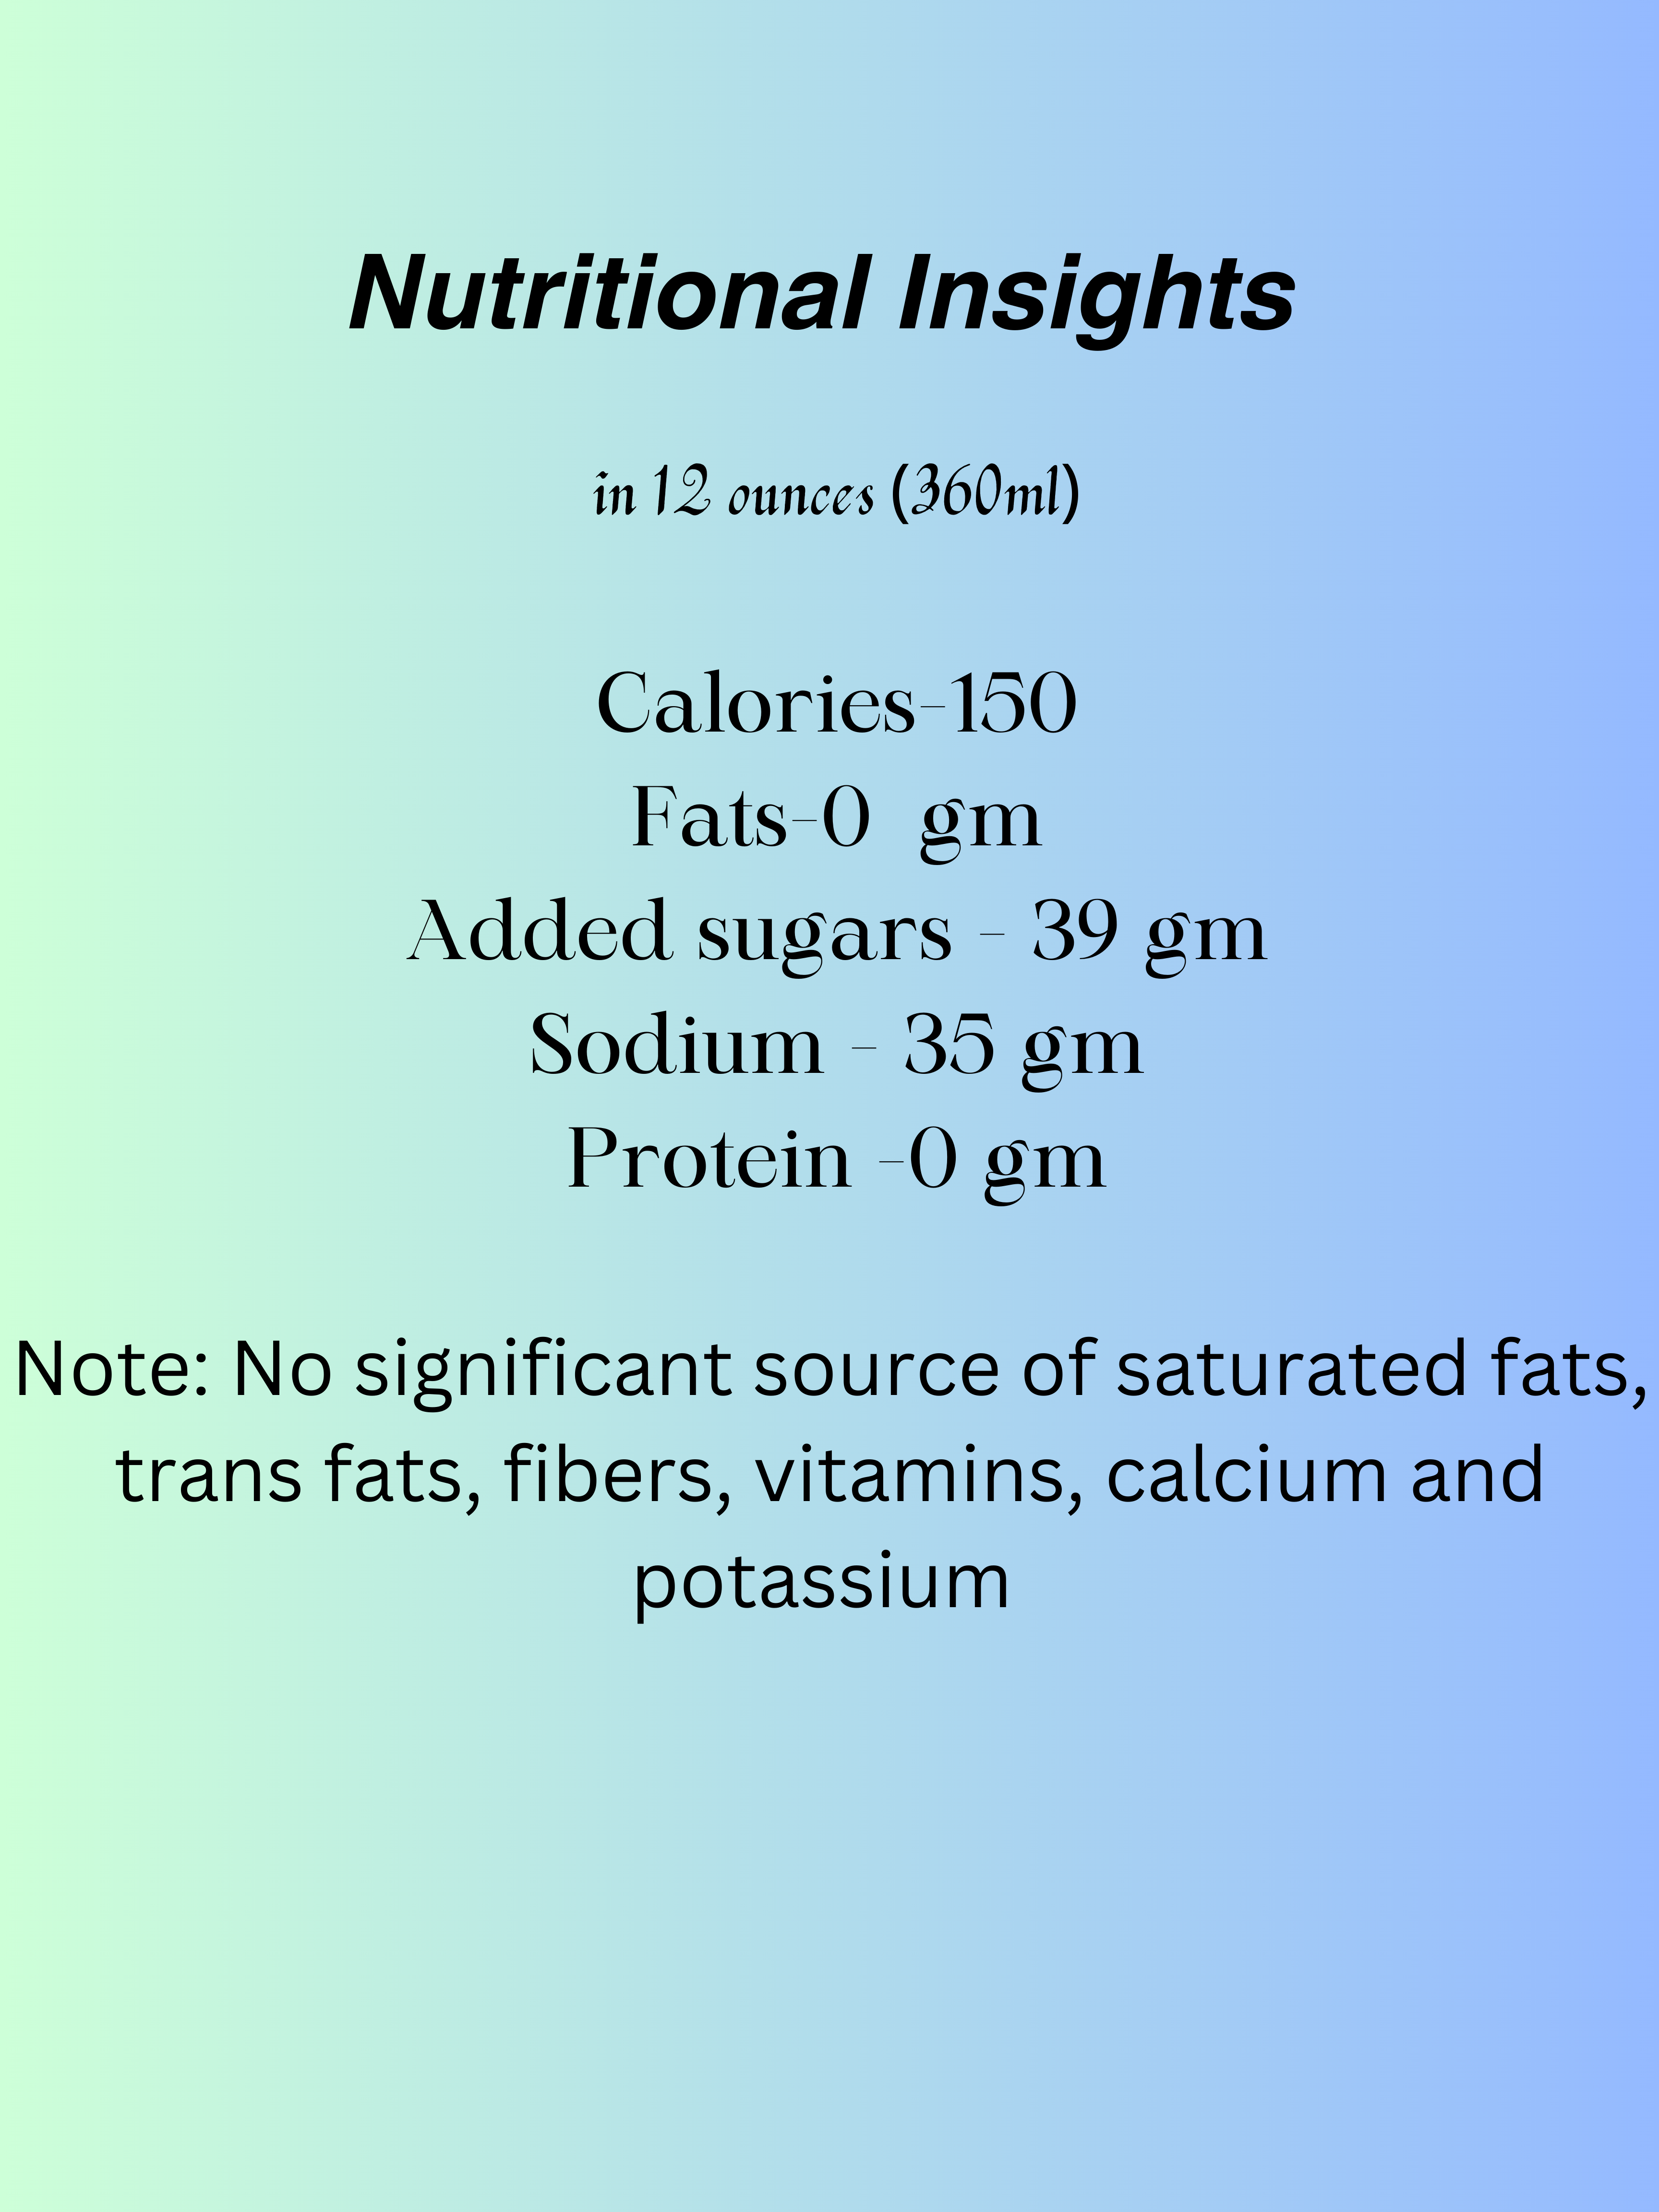 Nutrition insights of starry soda